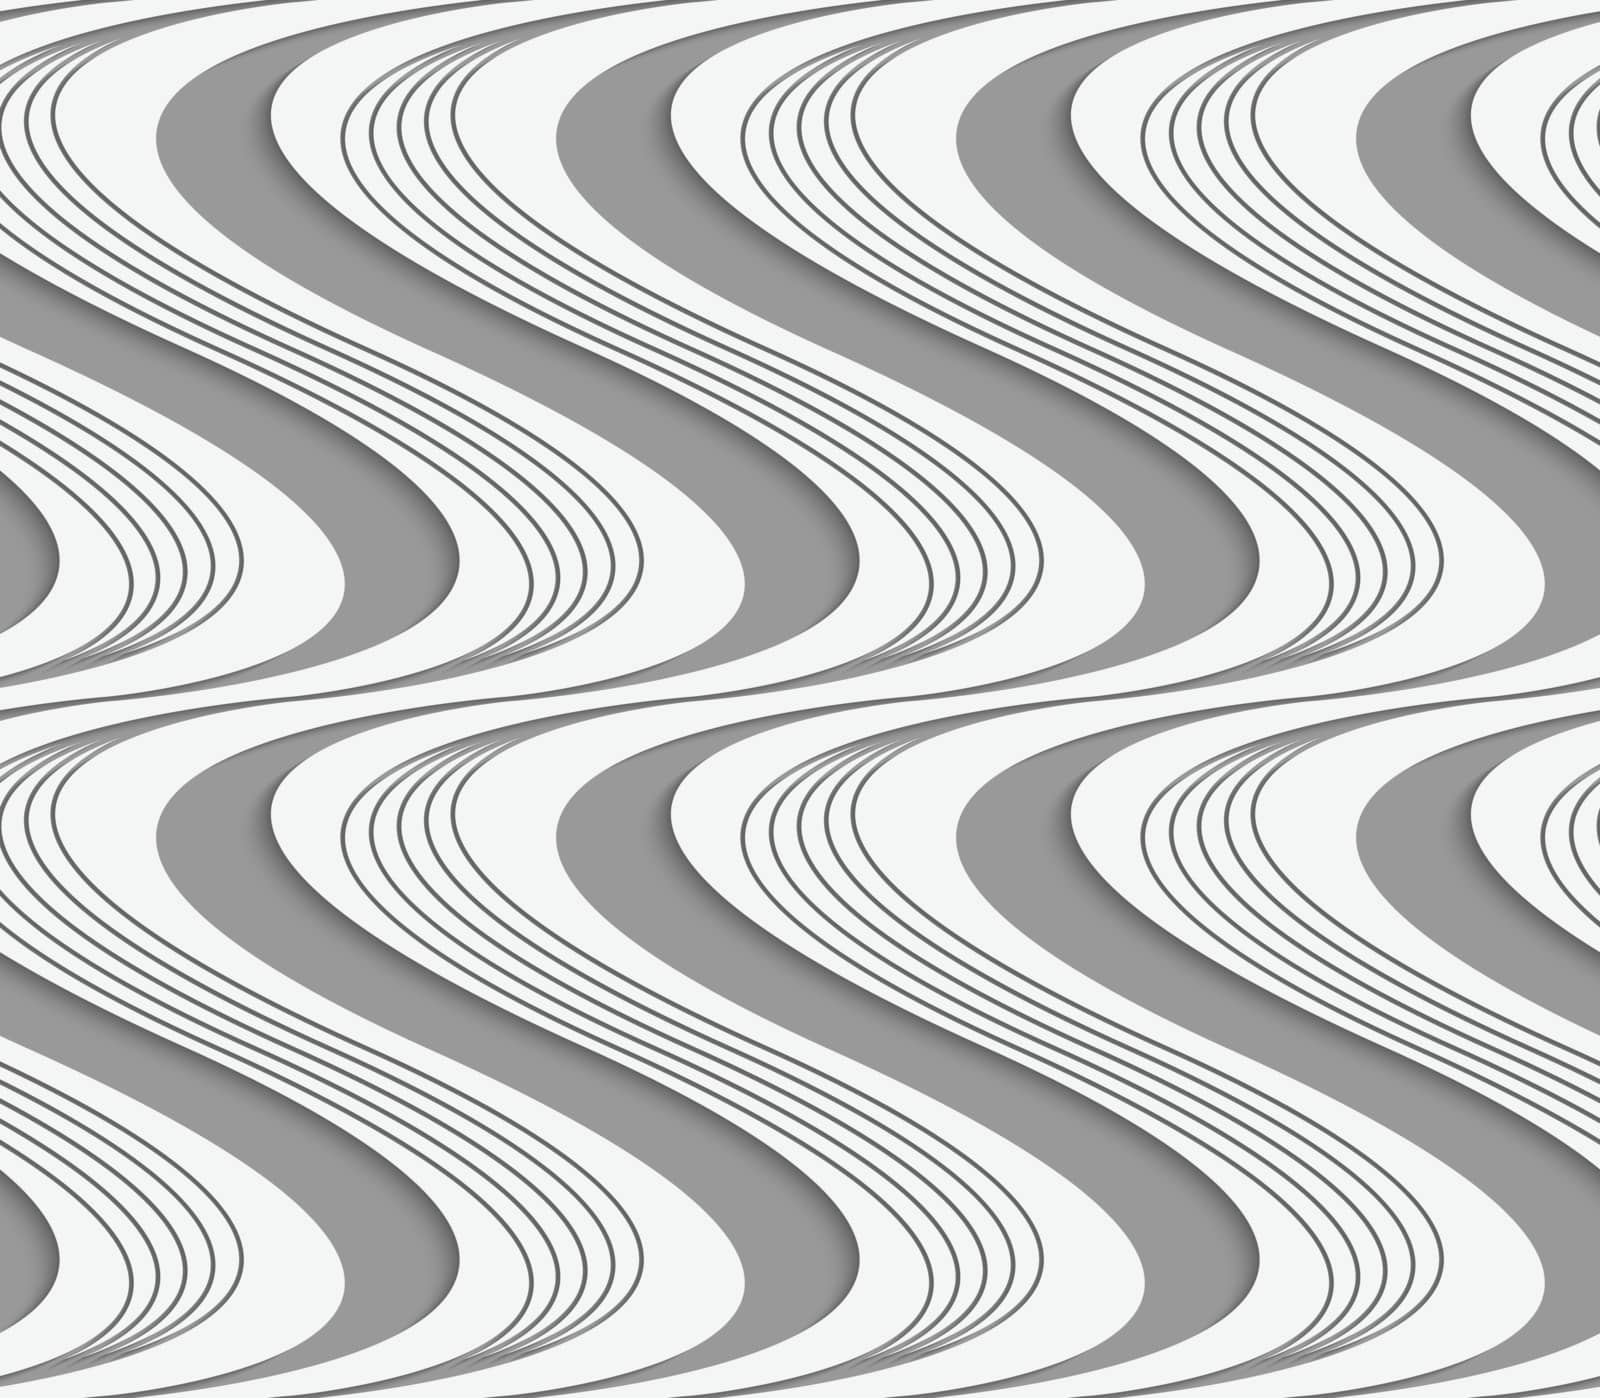 Perforated paper with vertical striped and solid waves by Zebra-Finch